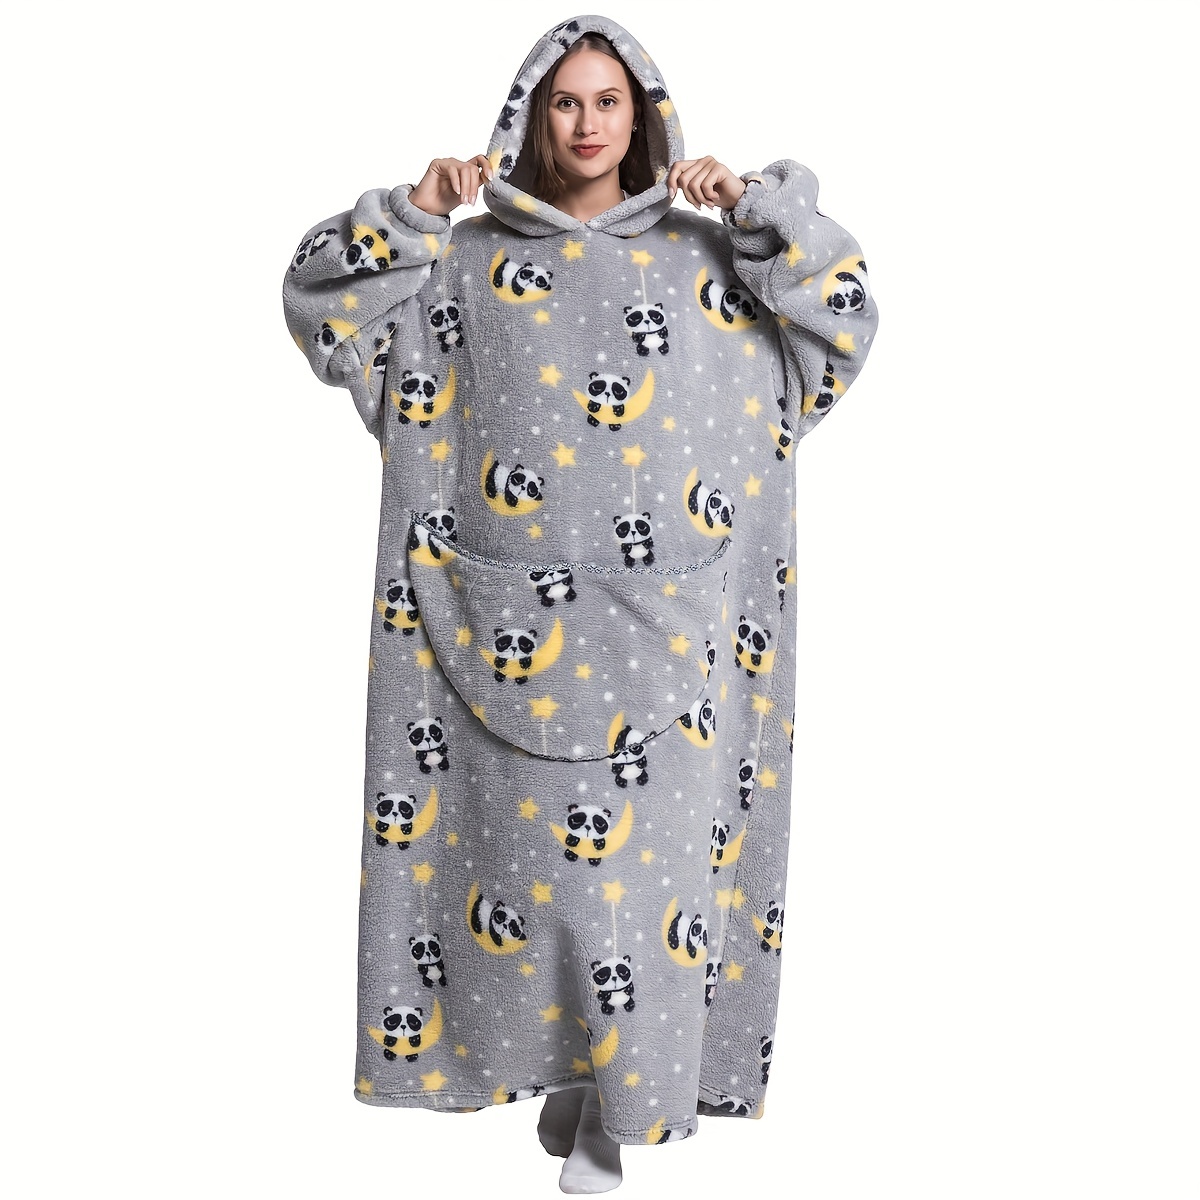 Oversized Wearable Blanket Hoodie,Extra Long & Warm Blanket Sweatshirt  Gifts for Women with Sleeves and Giant Pocket,Black